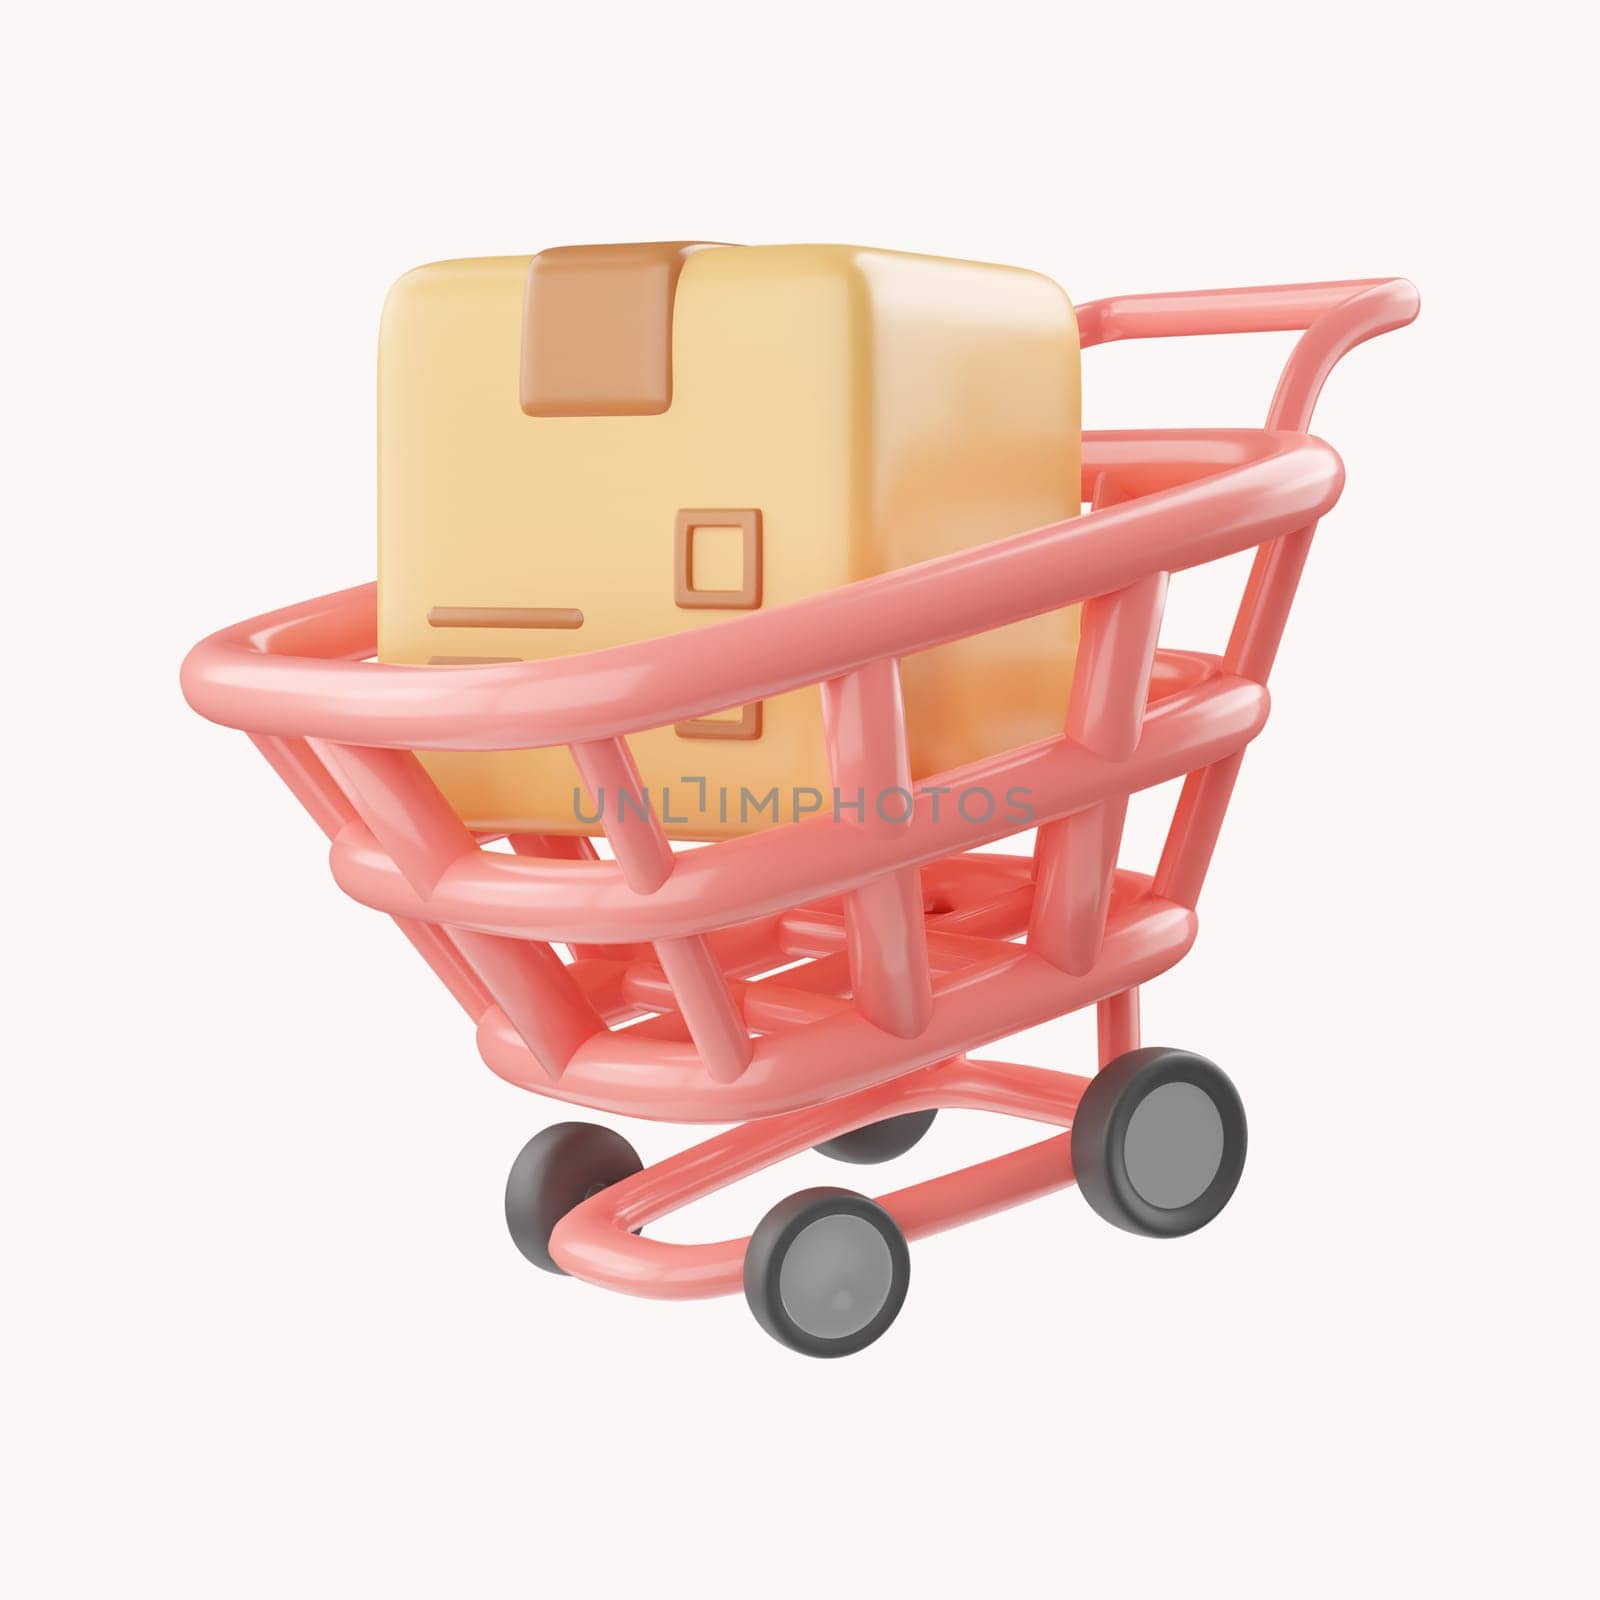 3D Shopping cart and cardboard box. Fast delivery concept from online store. Shipping logistics package delivery. Cargo box. Cartoon creative design icon isolated on white background. 3D Rendering by meepiangraphic